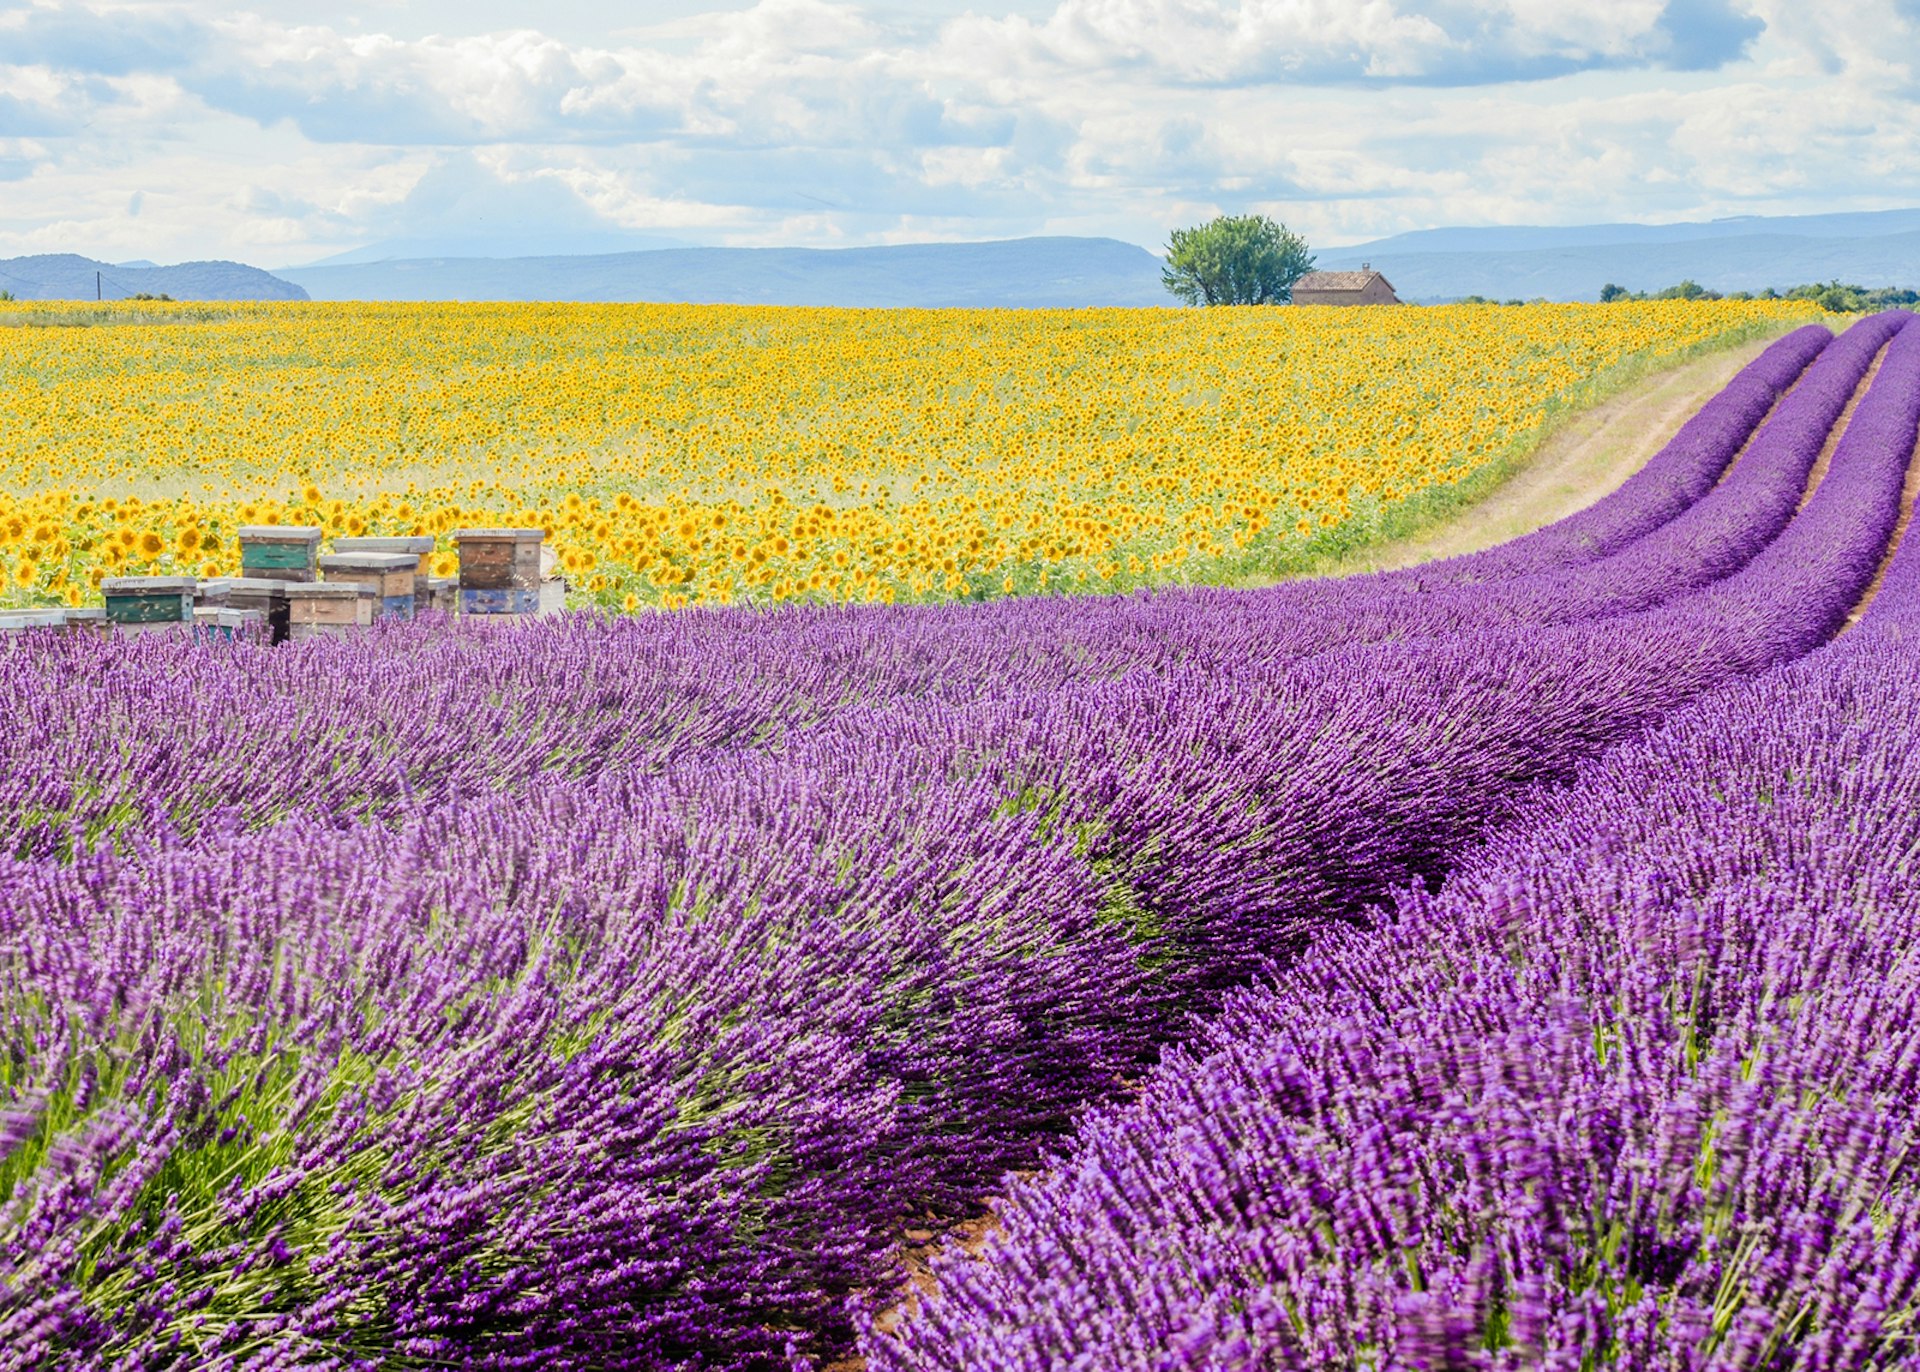 Colourful French fields in Provence. A field of yellow sunflowers runs parallel to a field of purple lavender